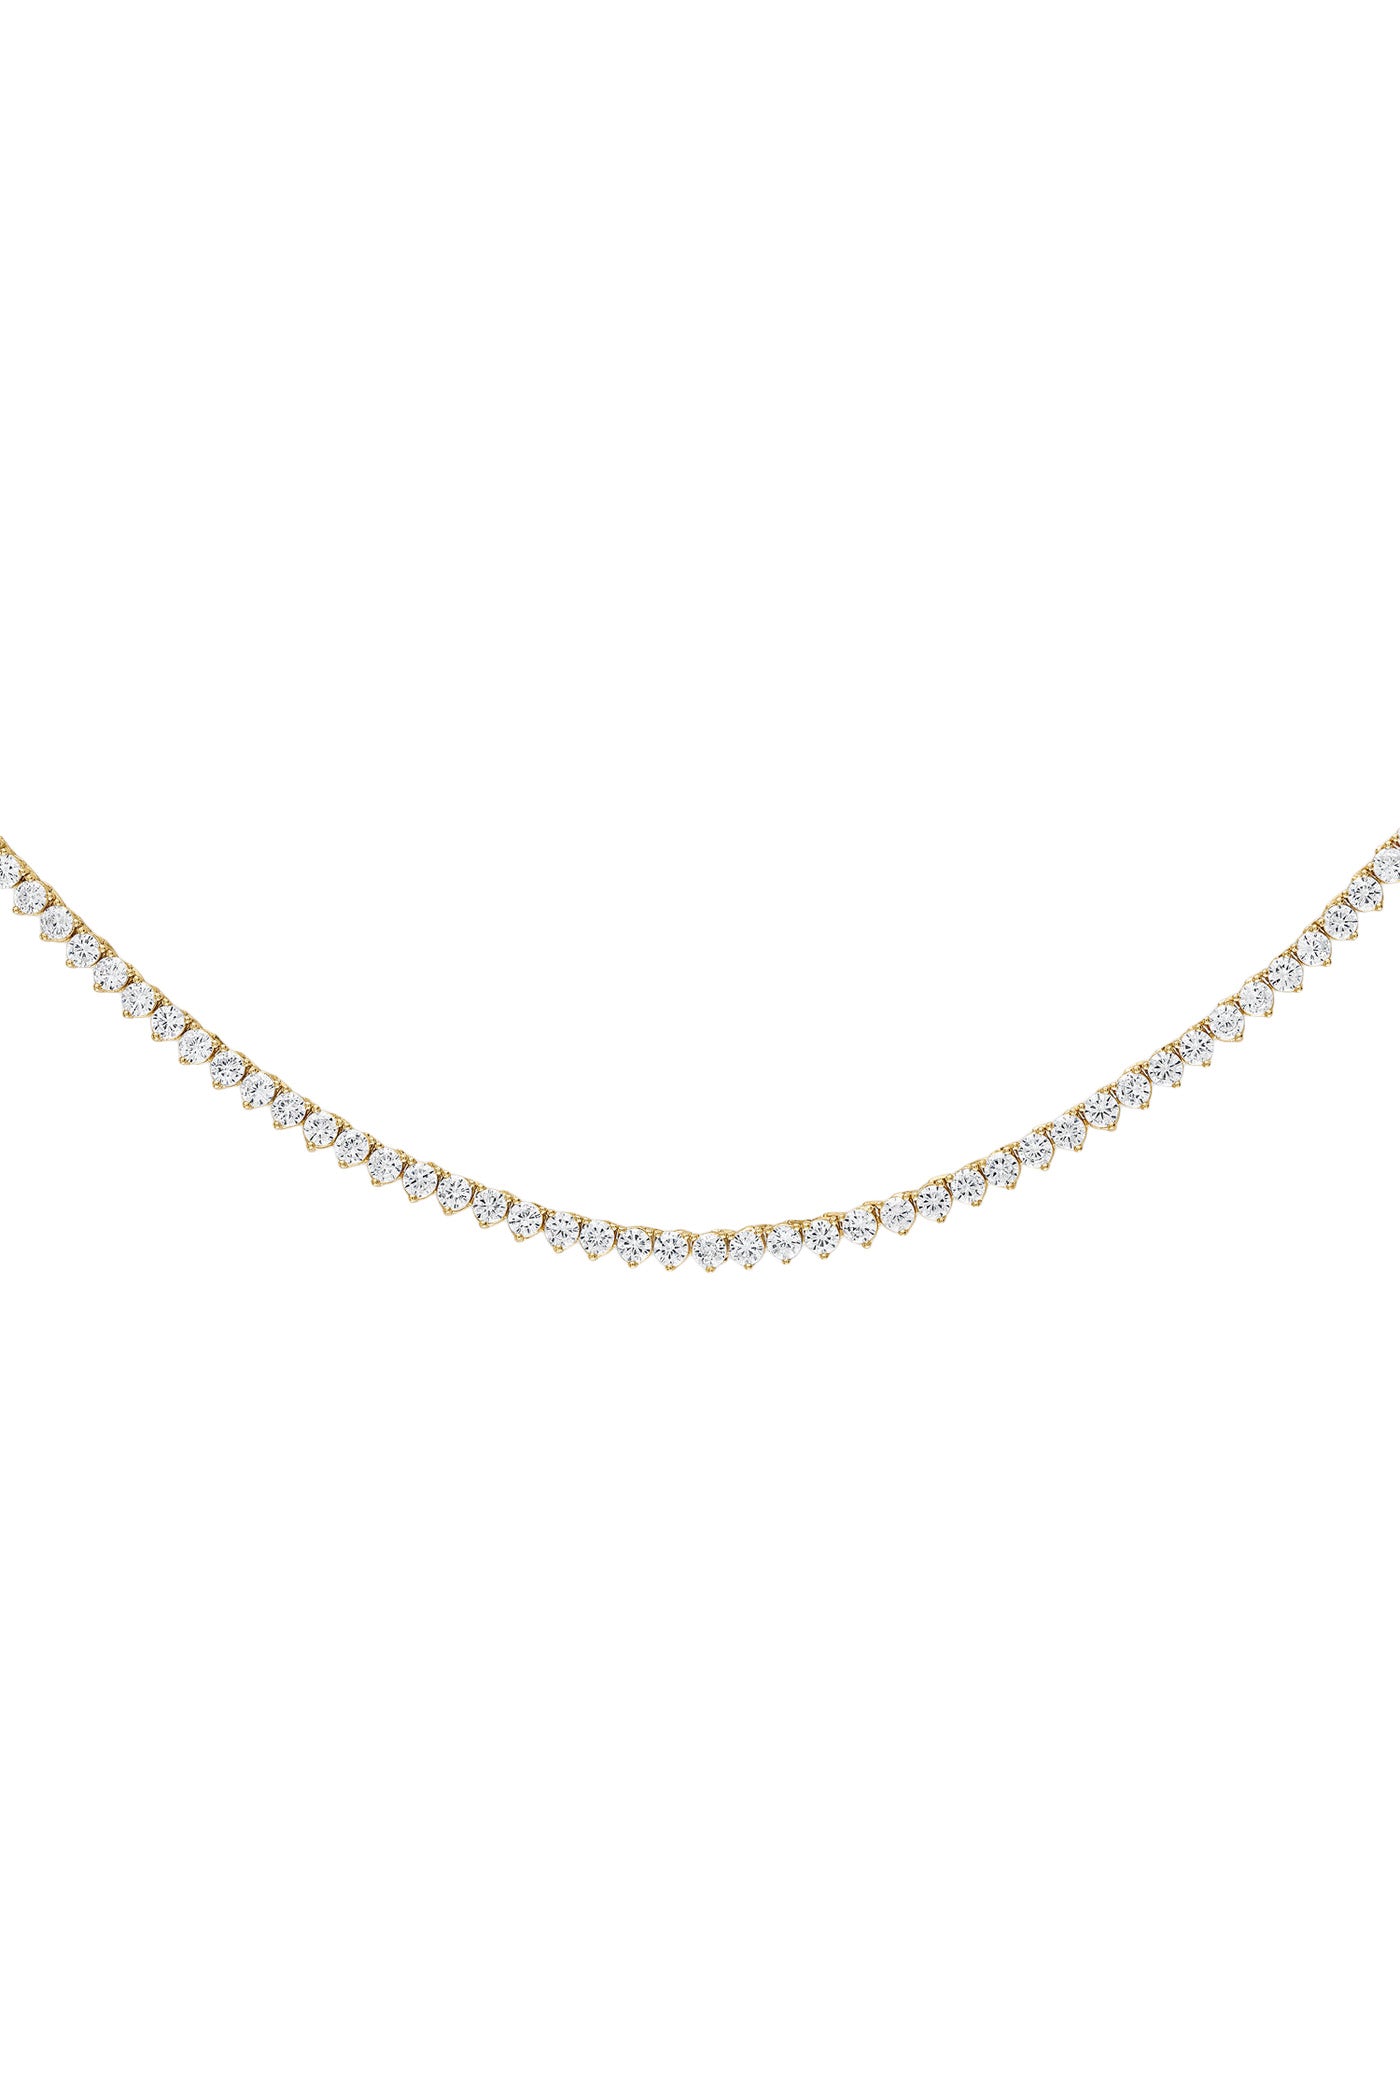 Alexa Leigh Crystal Tennis Necklace in Yellow Gold